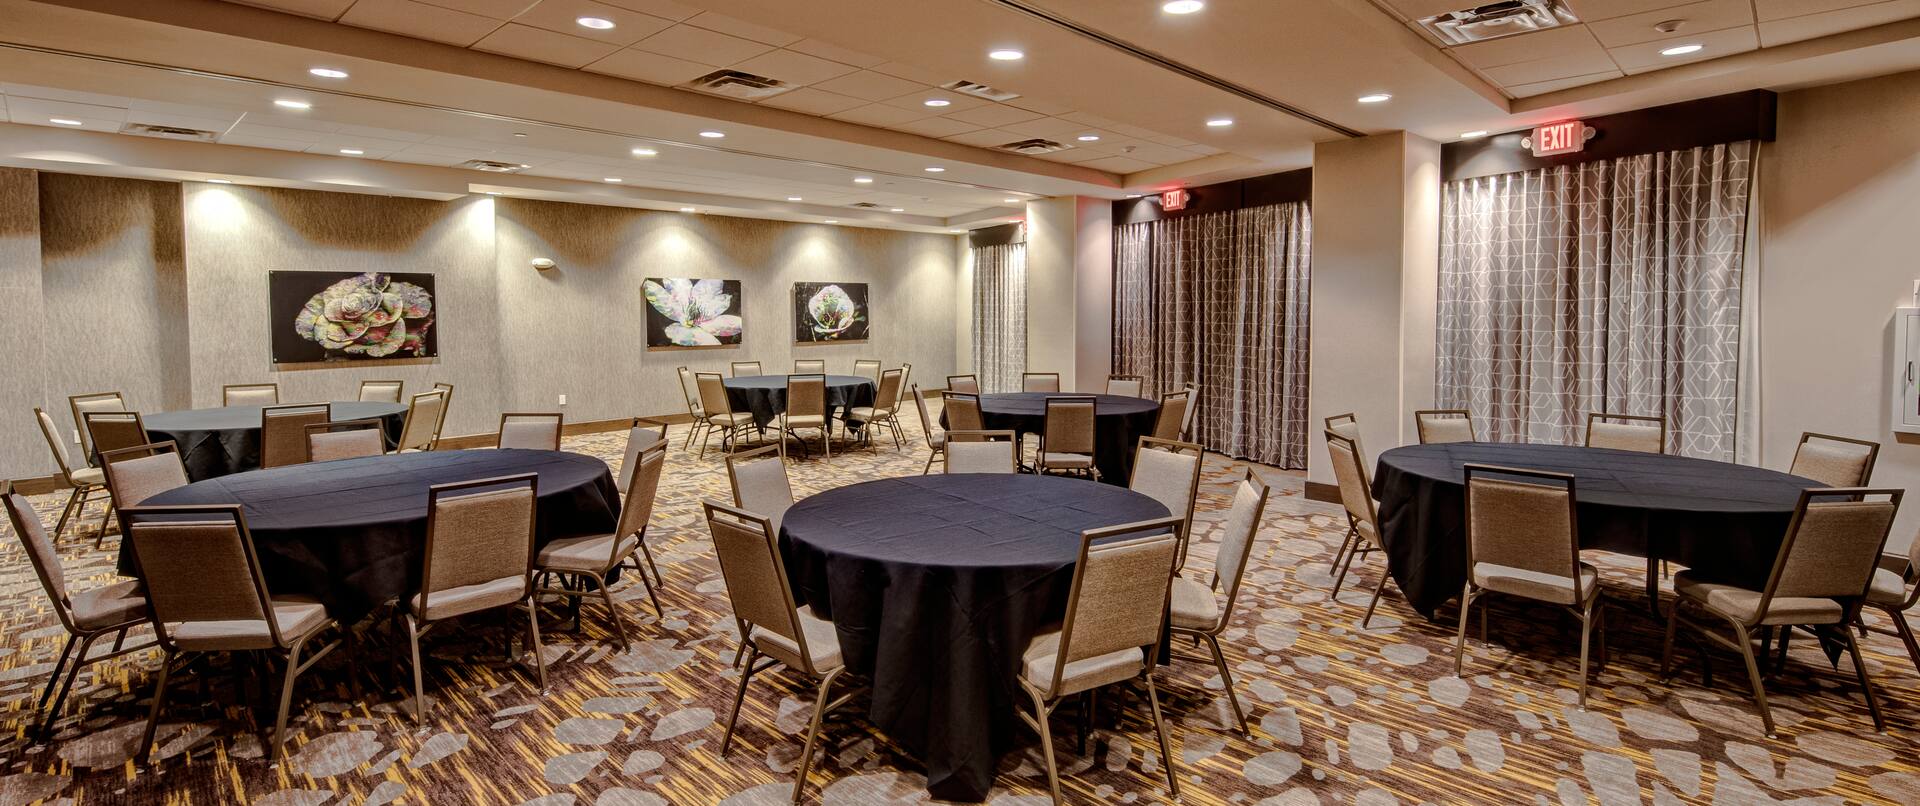 Meeting room with round tables